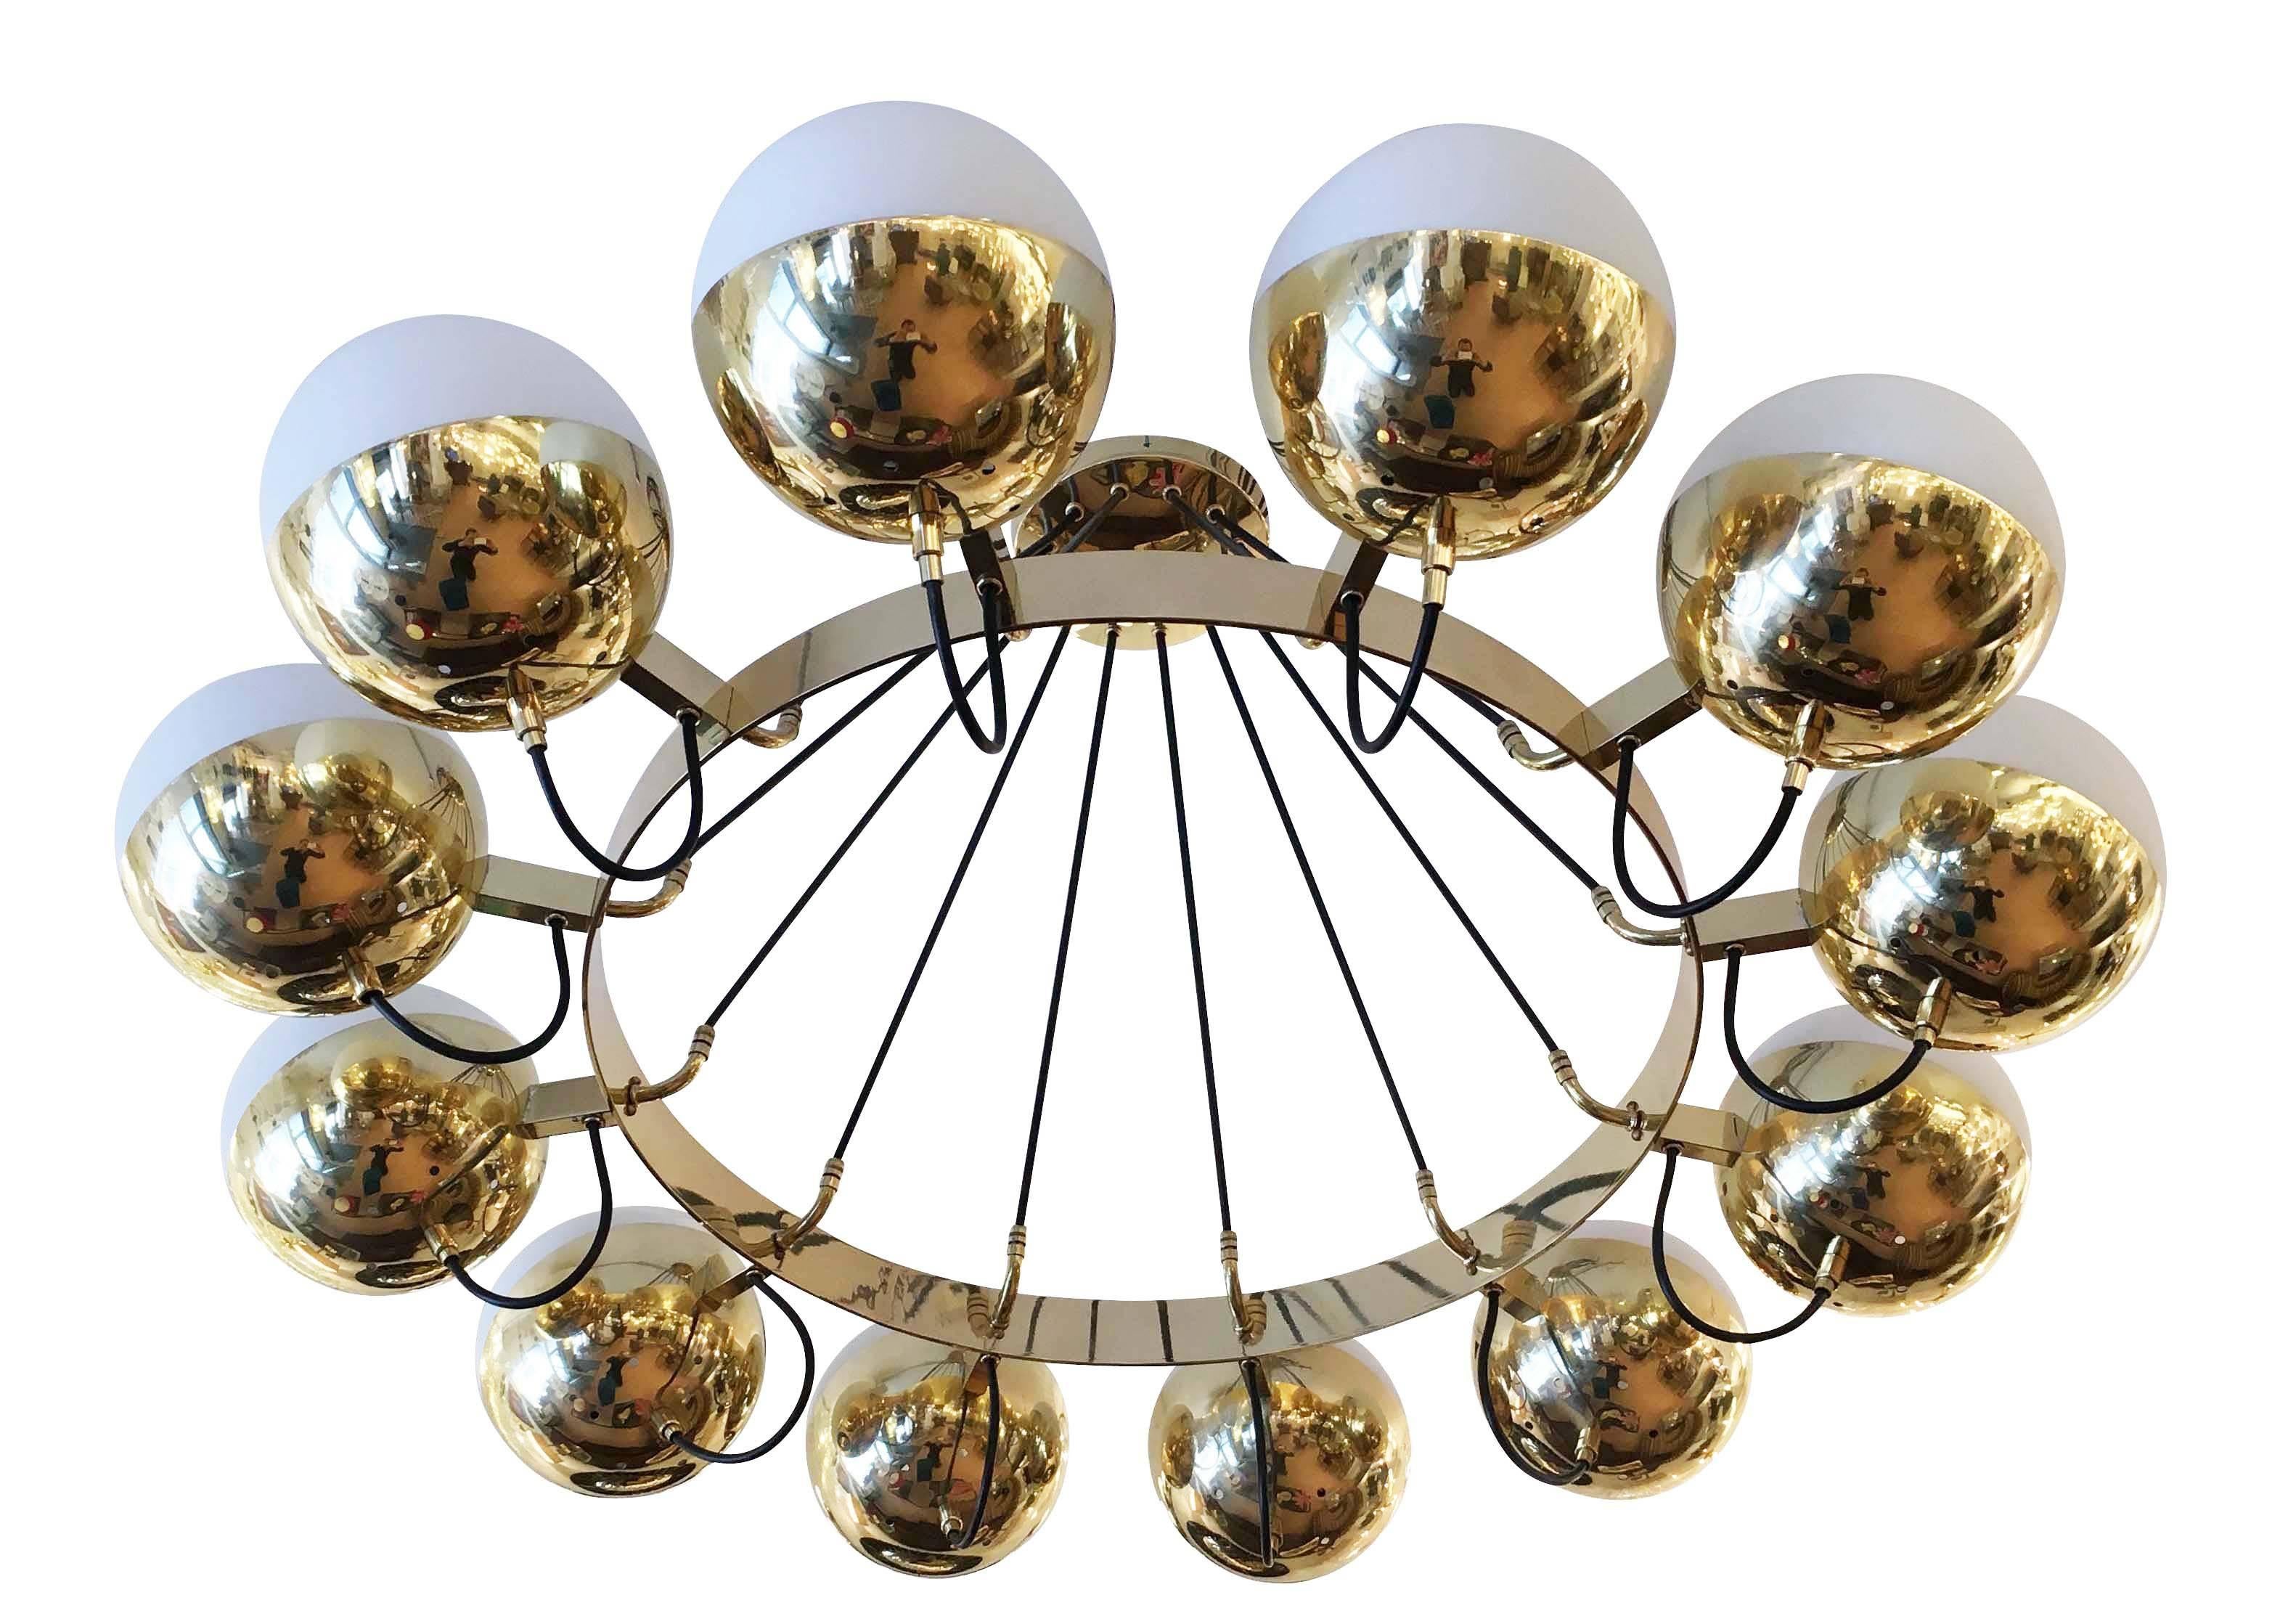 Large chandelier with a brass frame supporting twelve frosted glass shades. The electrical cords hold the main frame and connect to the flush mount canopy. Height can be adjusted as needed. 